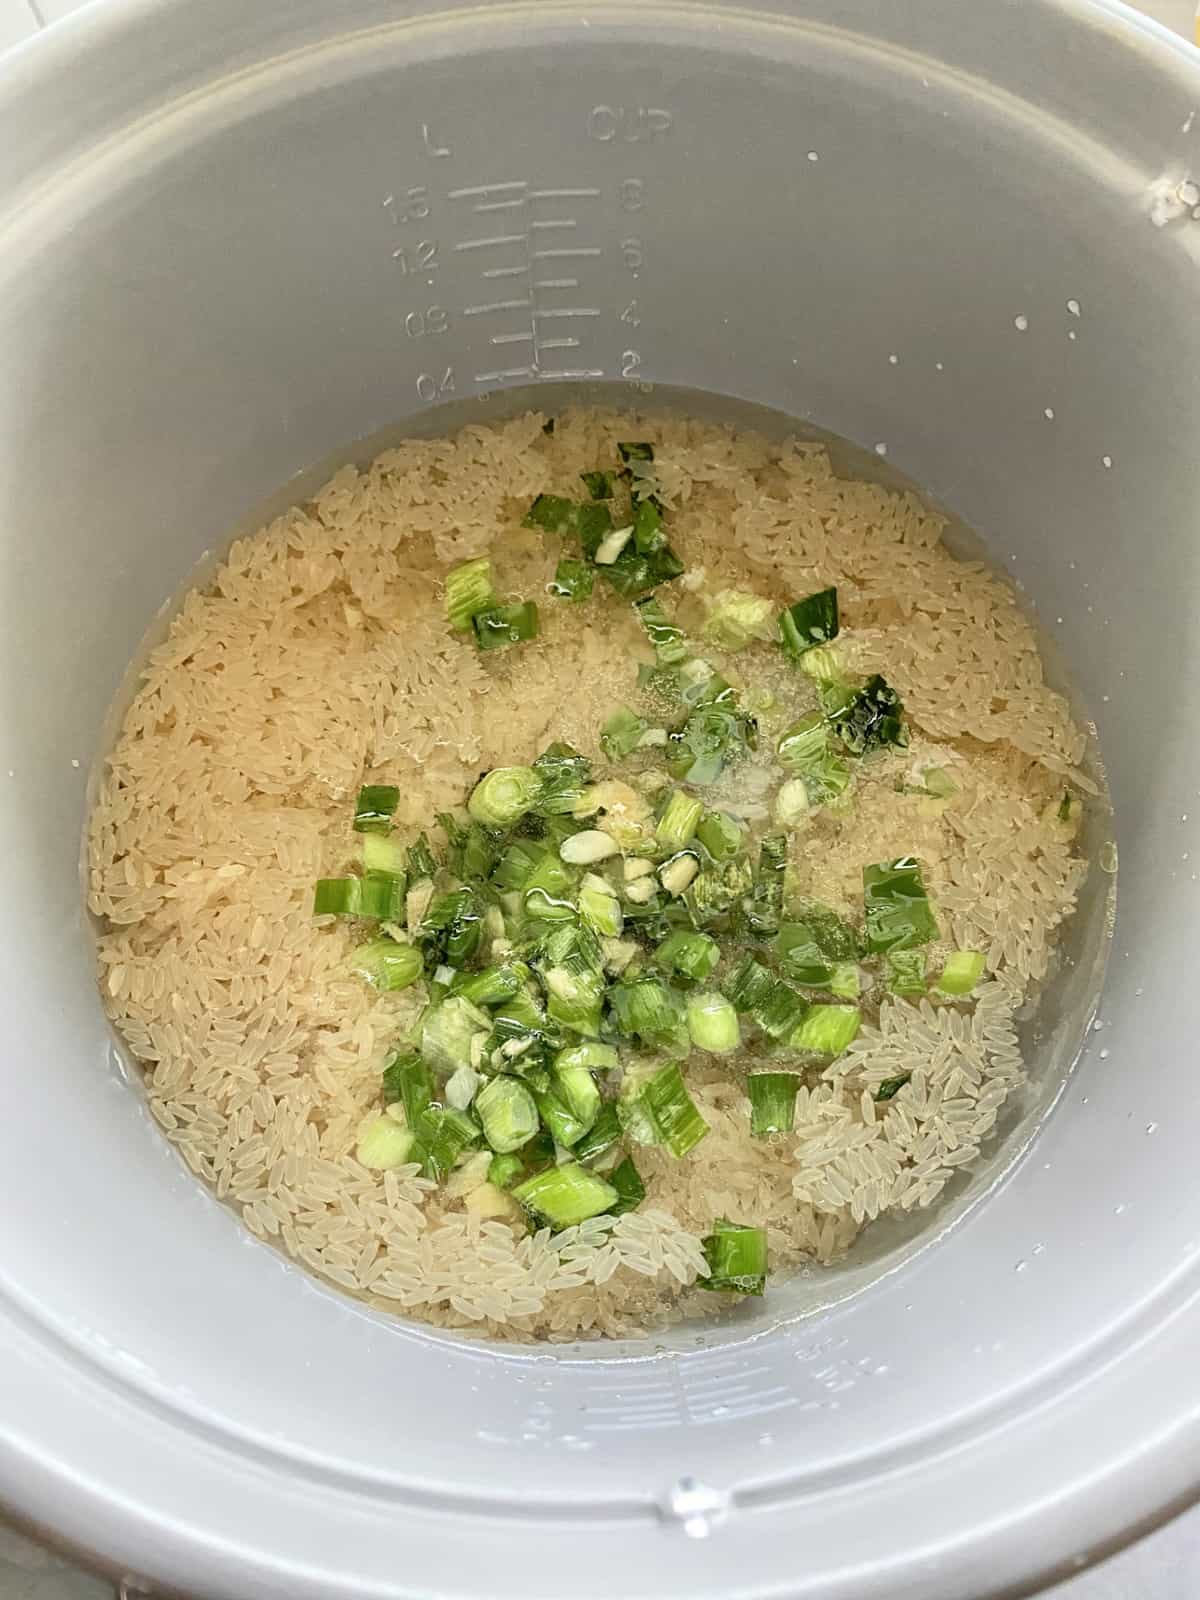 Rice in a silver rice cooker pot with green onions and water.